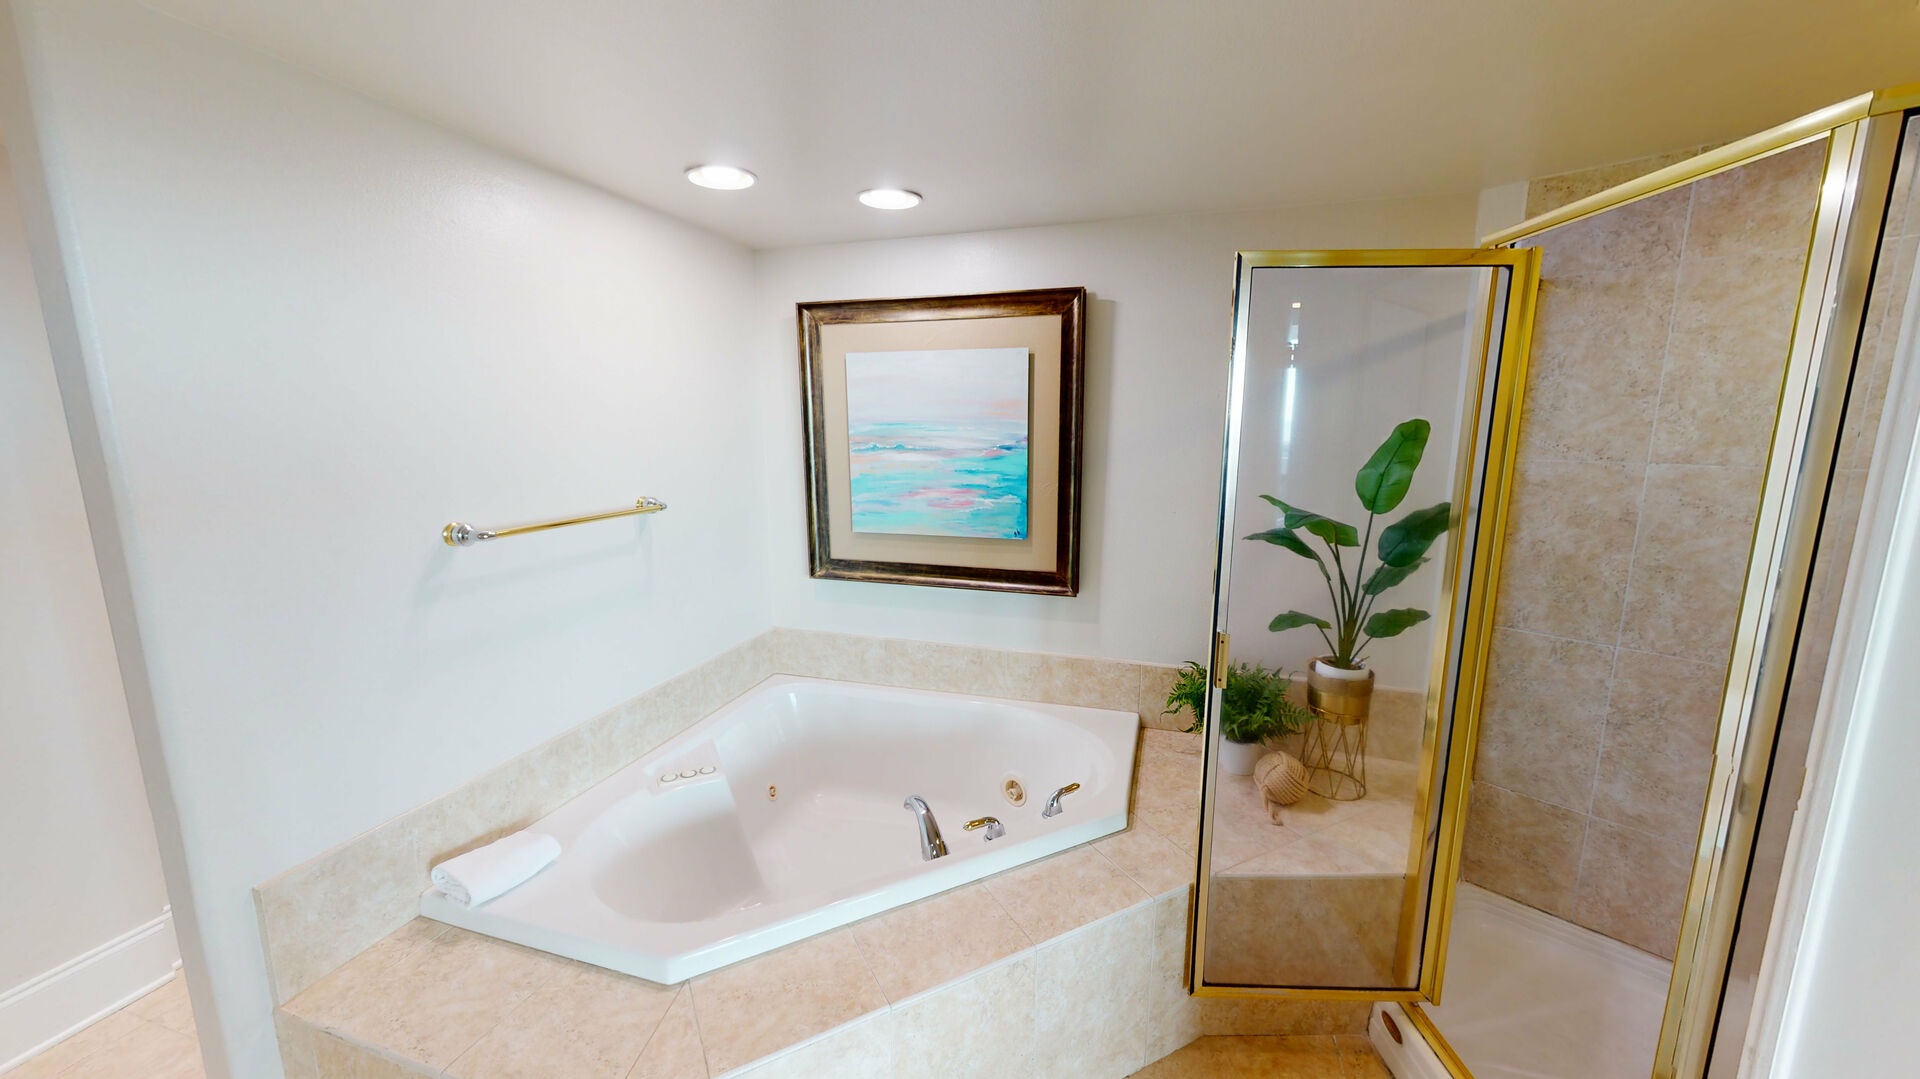 Luxury jetted tub in the master bathroom